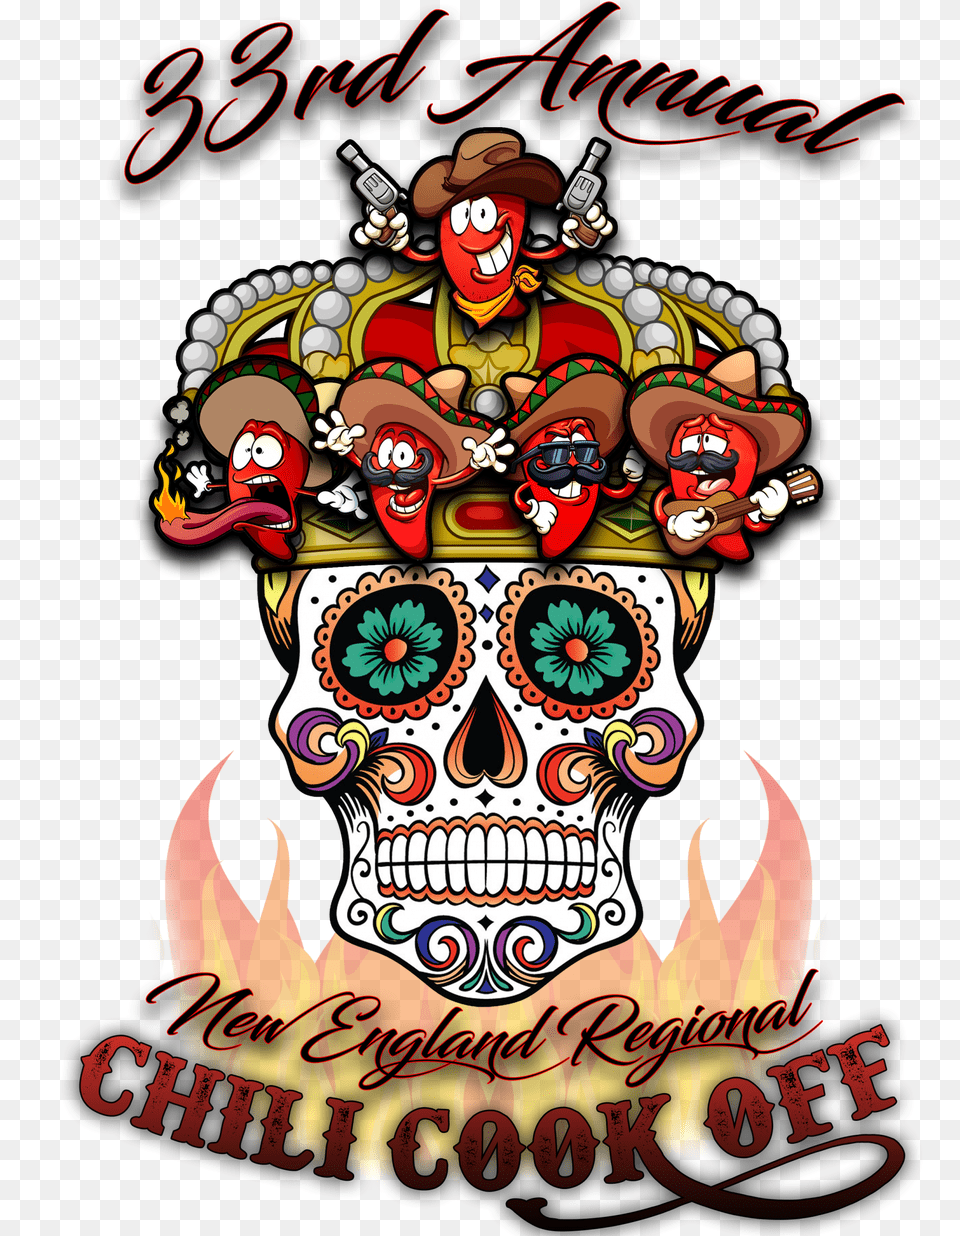 Chilict New England Regional Chili Cook Off, Emblem, Symbol, Advertisement, Poster Png Image